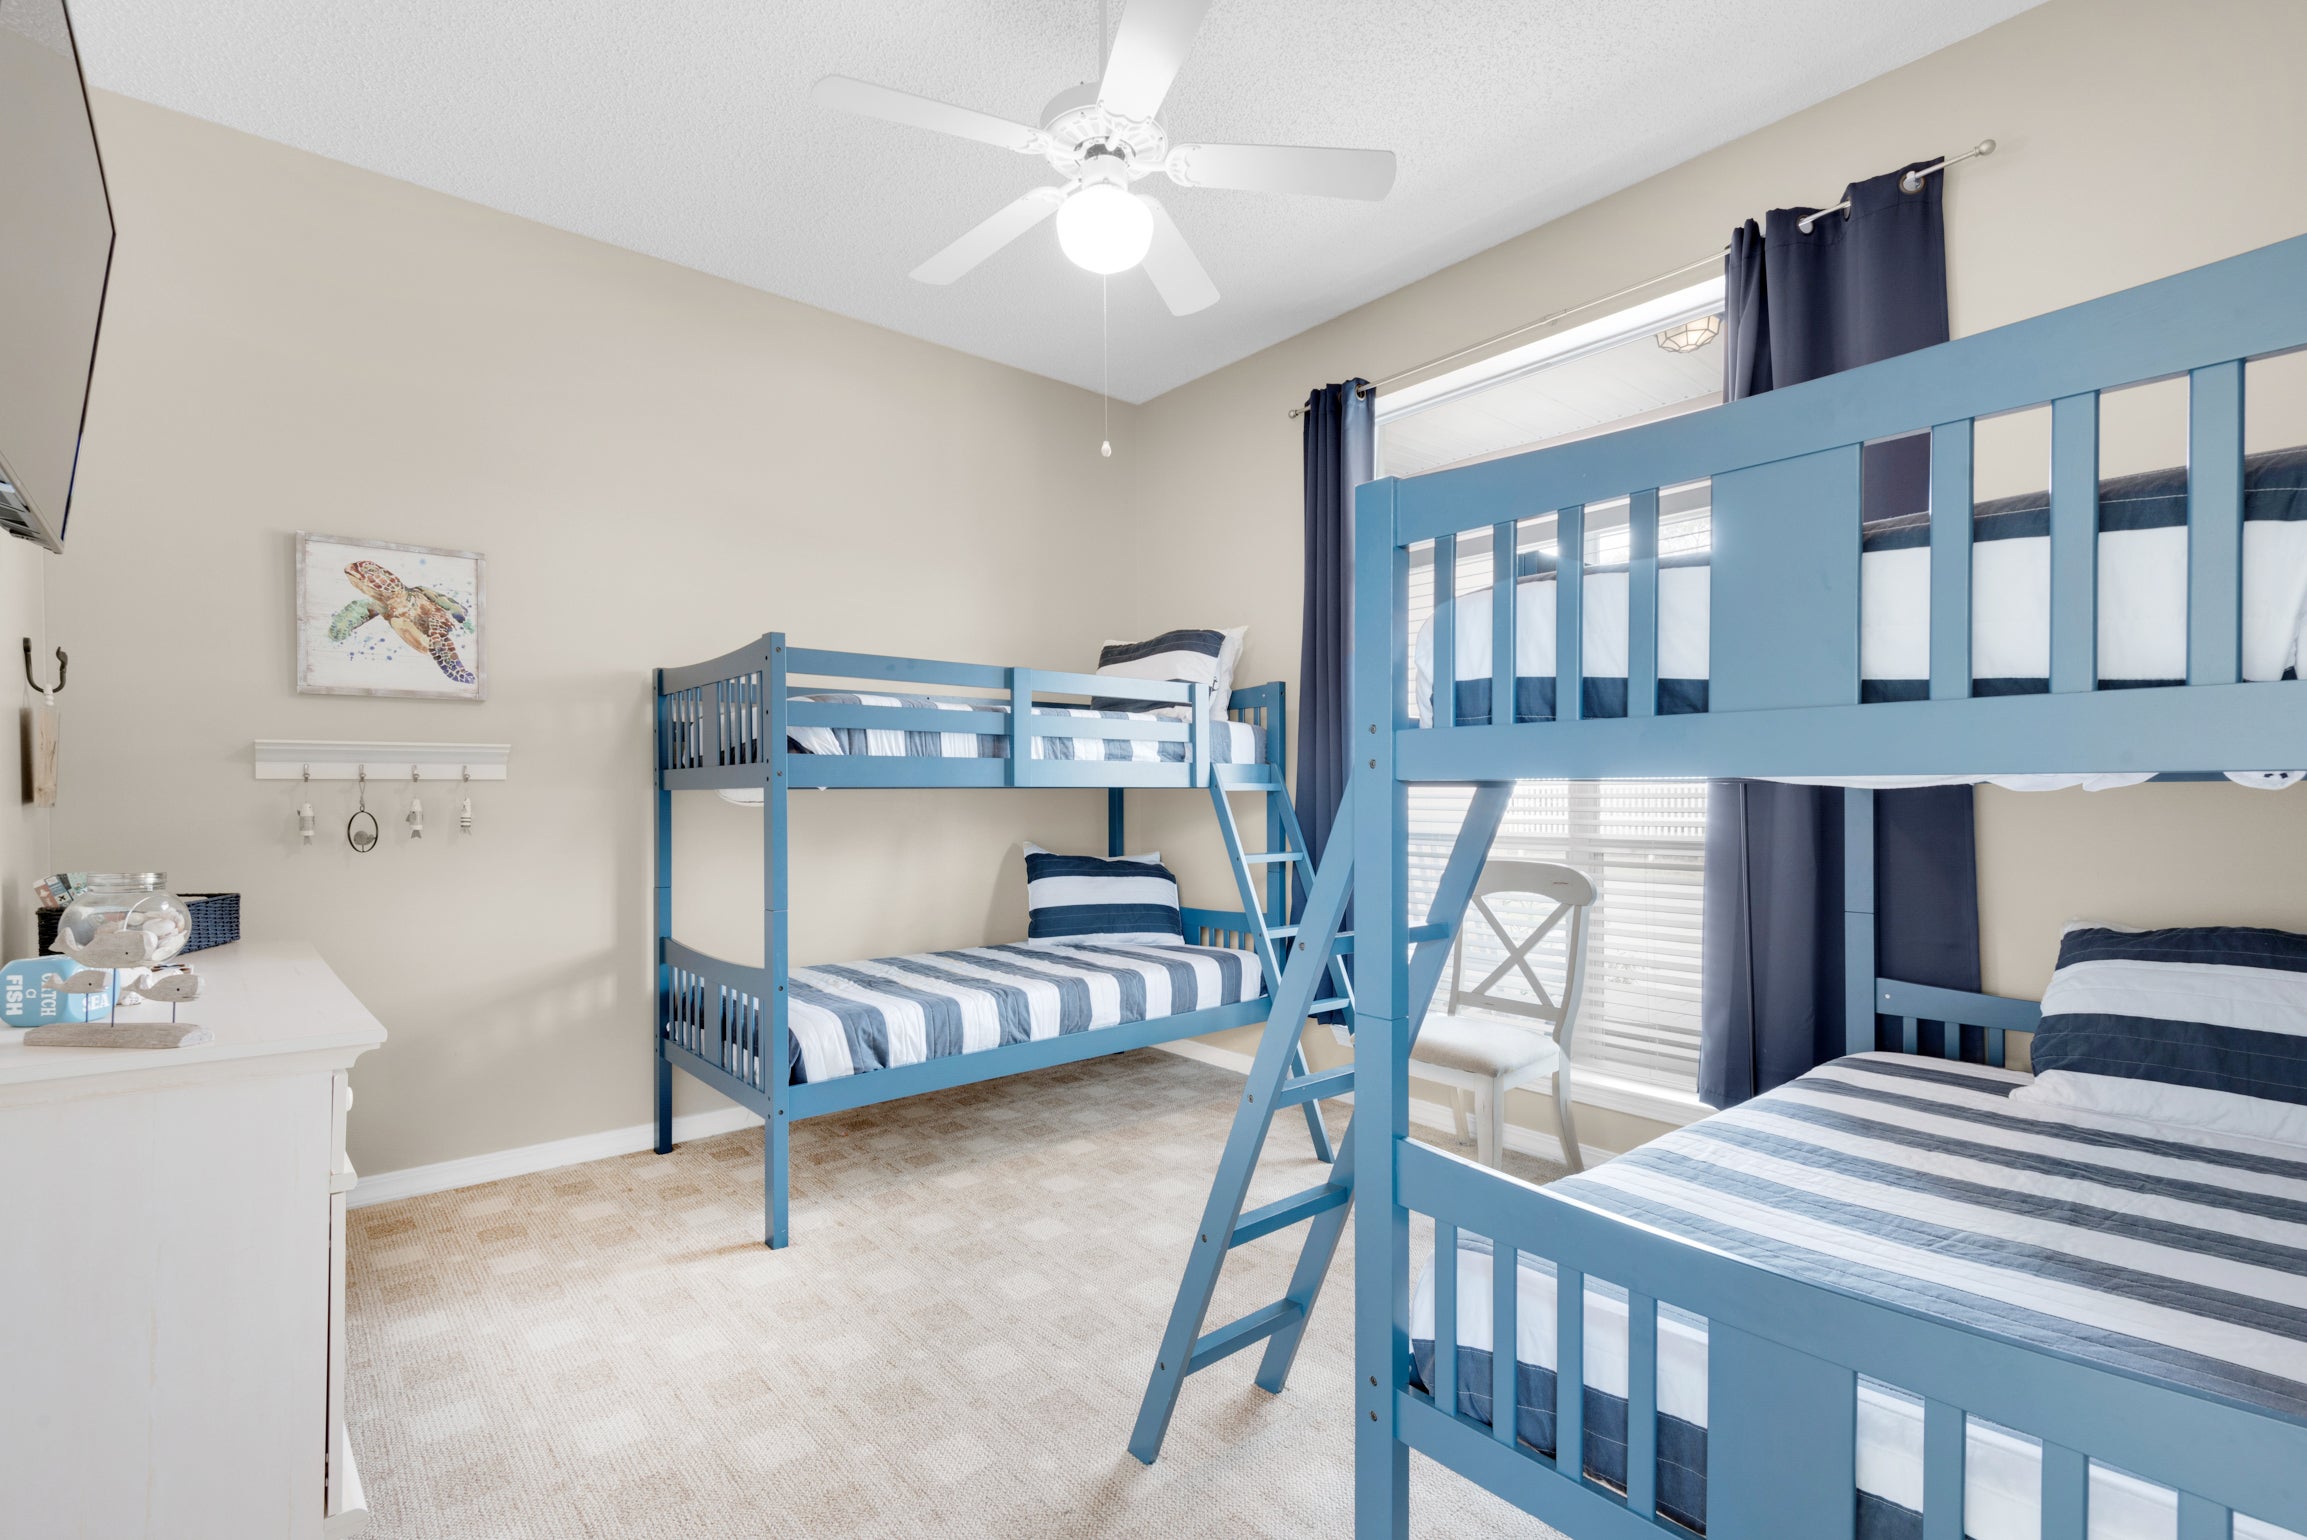 Guest bunk room with 2 sets of beds